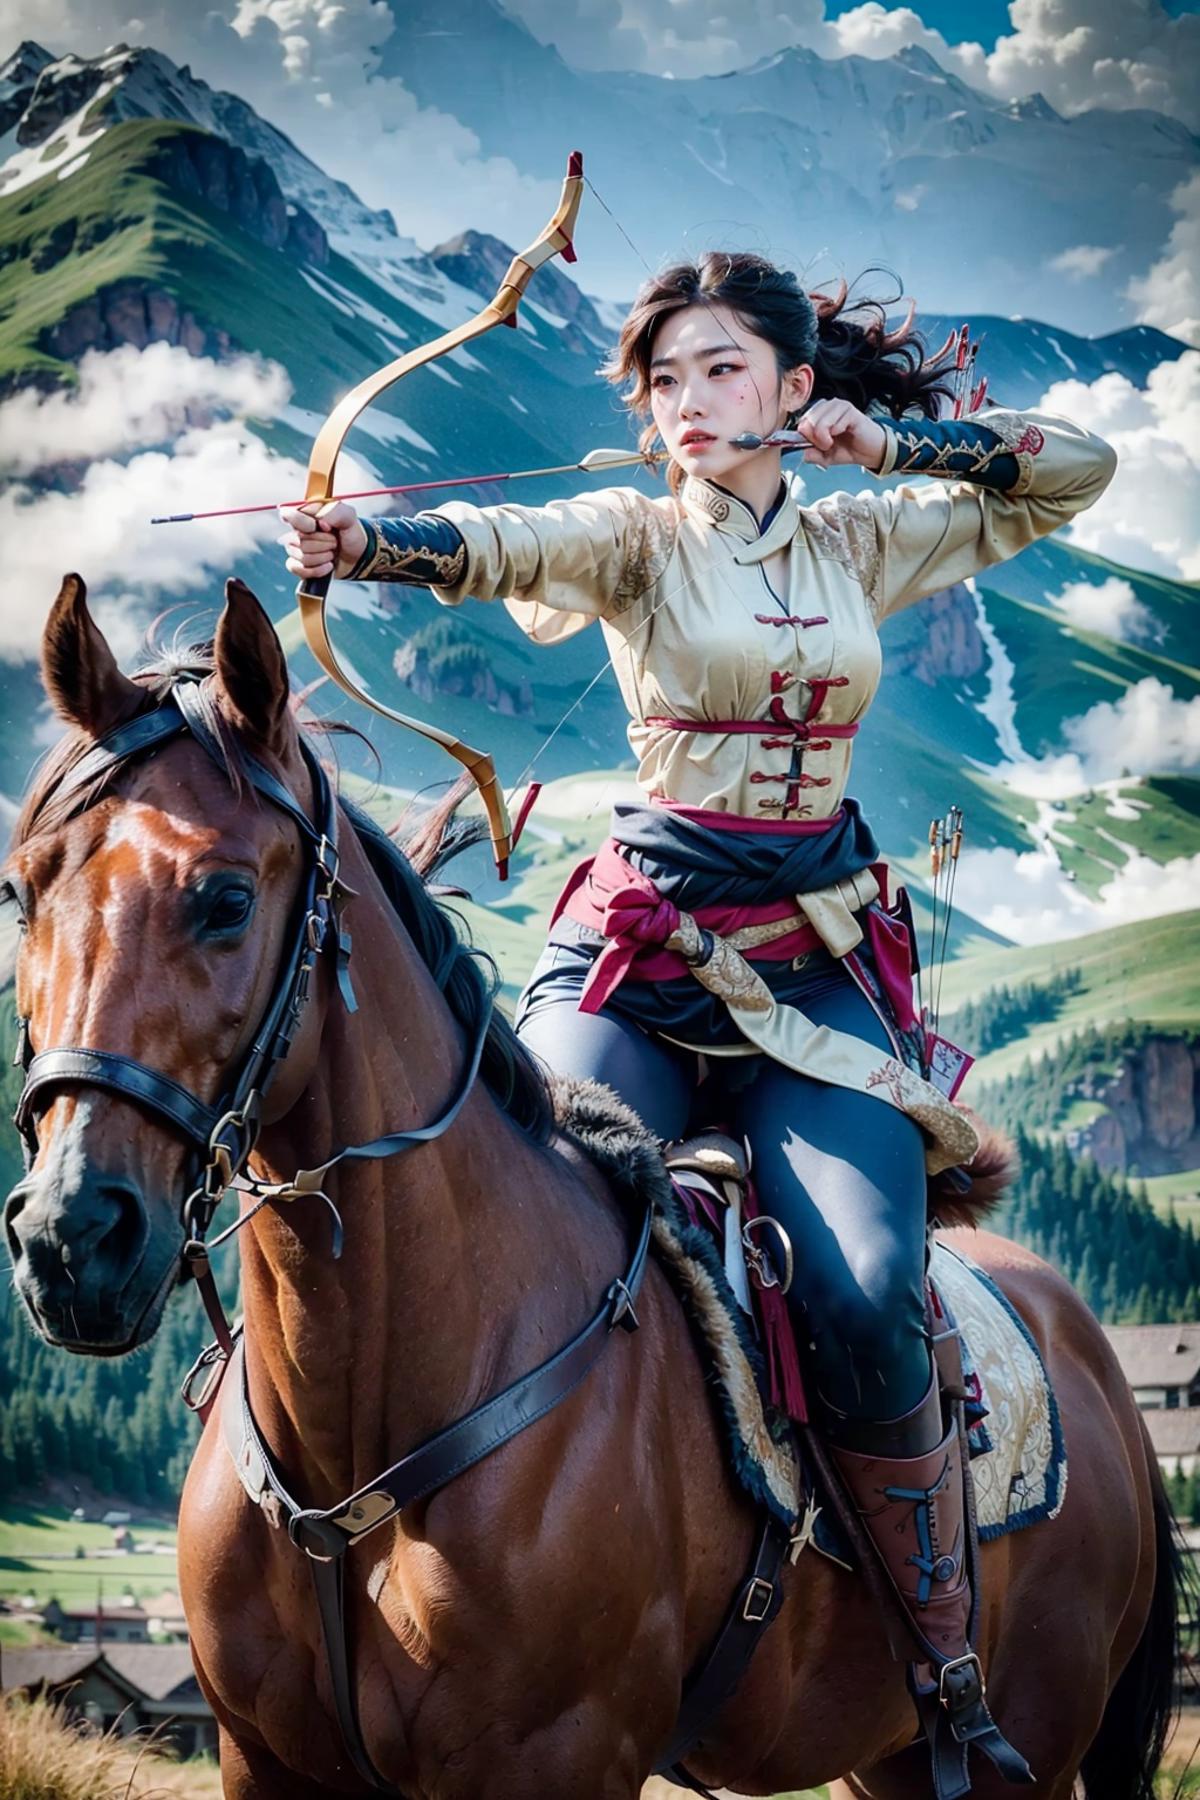 Mounted Archery | 騎射 | 骑射 image by feetie